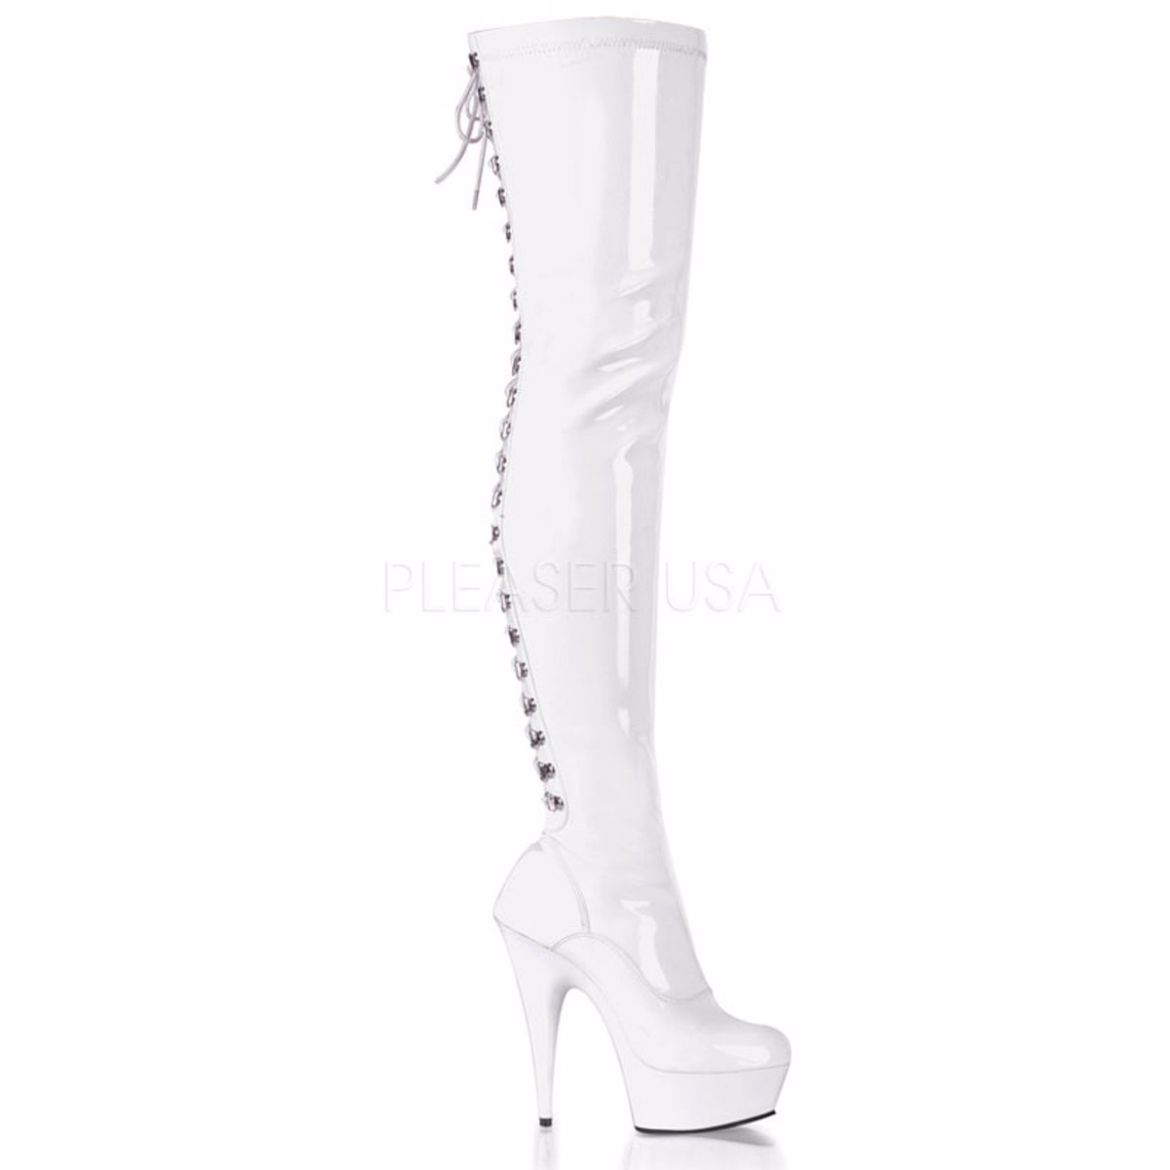 Product image of Pleaser Delight-3063 White Stretch Patent/White, 6 inch (15.2 cm) Heel, 1 3/4 inch (4.4 cm) Platform Thigh High Boot